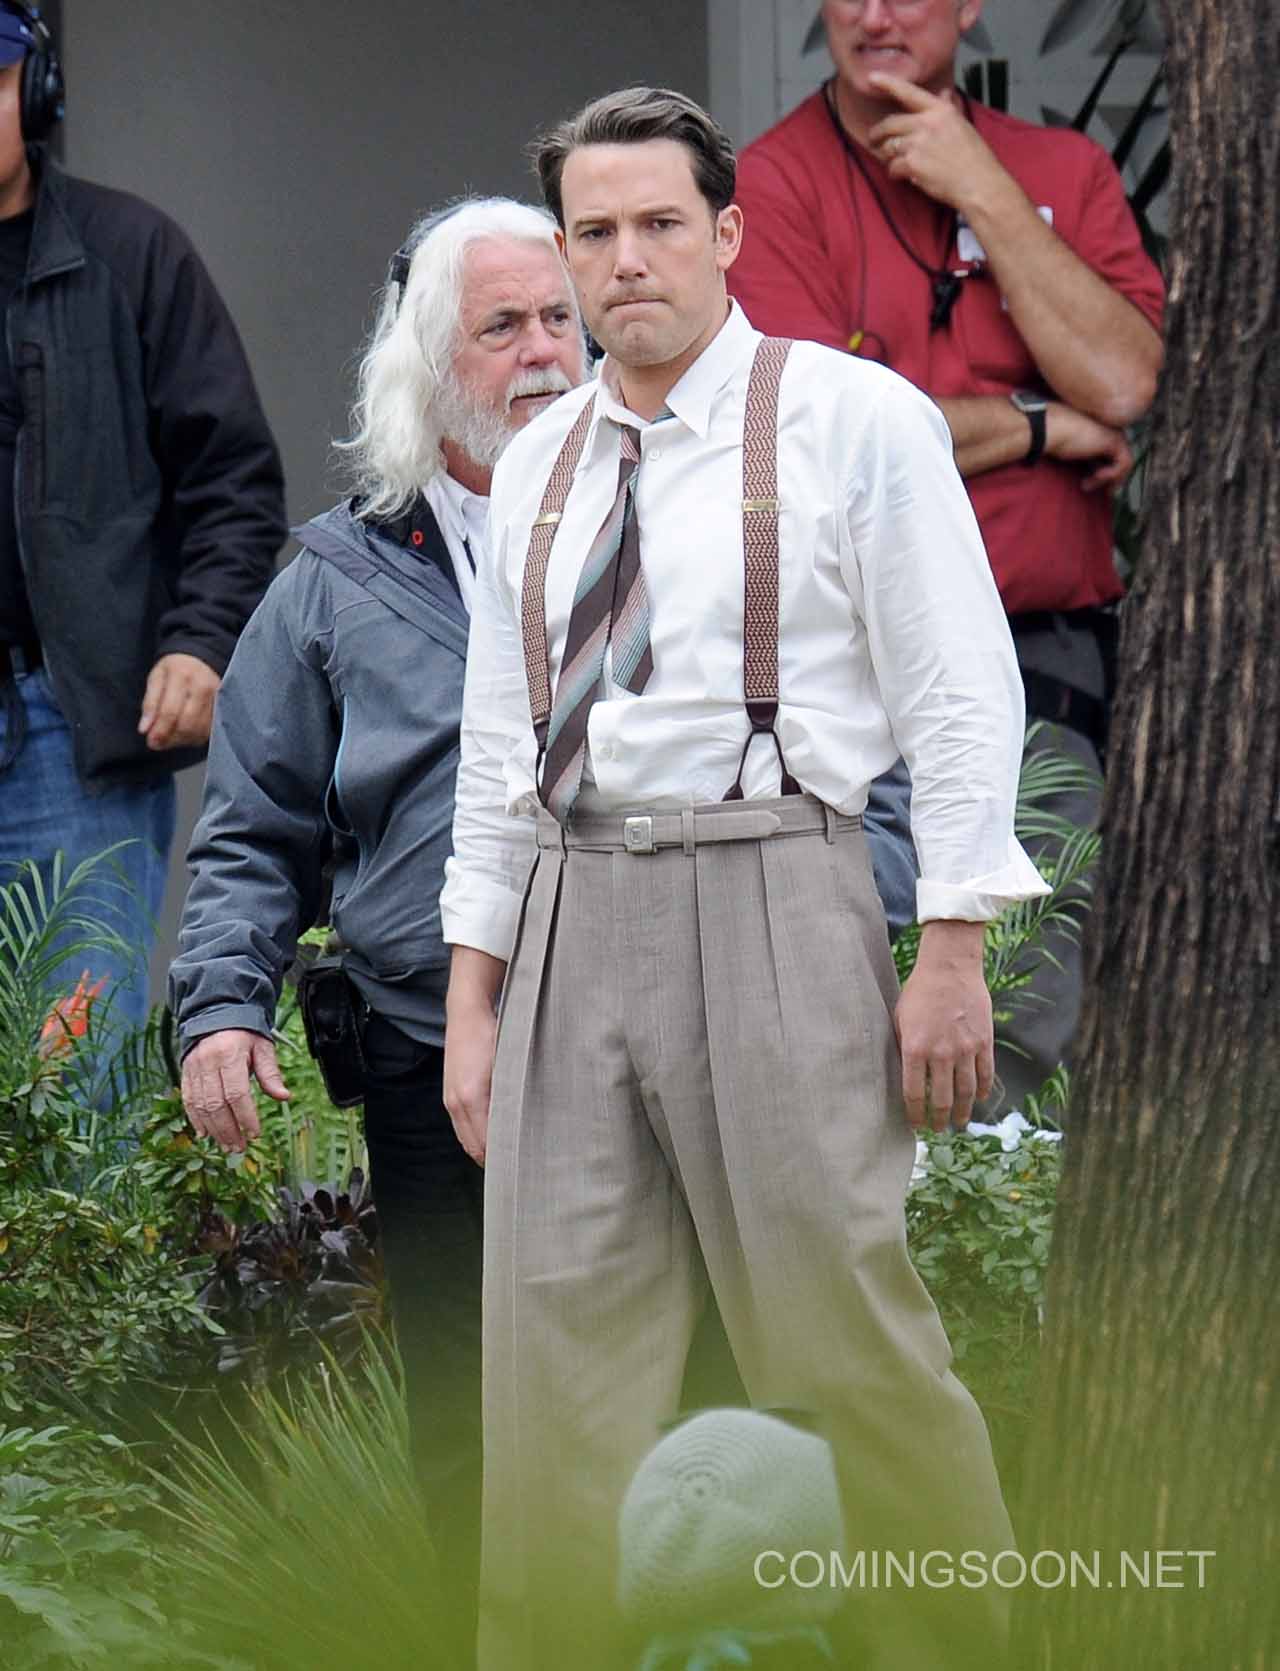 Actor Ben Affleck spotted on the set of 'Live By Night' filming in costumeFeaturing: Ben AffleckWhere: Long Beach, California, United StatesWhen: 18 Jan 2016Credit: Cousart/JFXimages/WENN.com